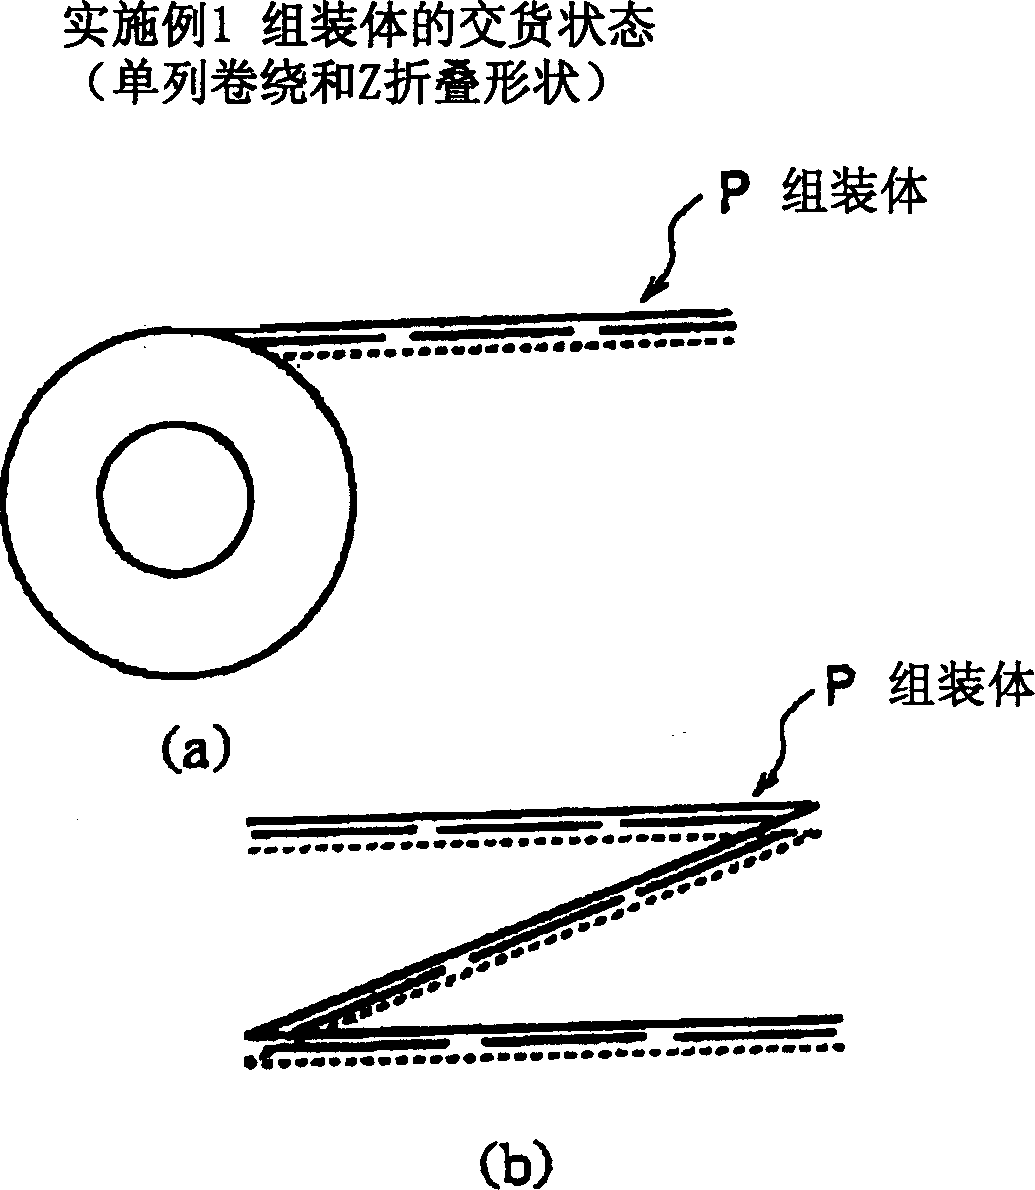 Sheet-form optical element package body, method of using sheet-form optical element, production method for sheet-form optical element package body, and production device for the same